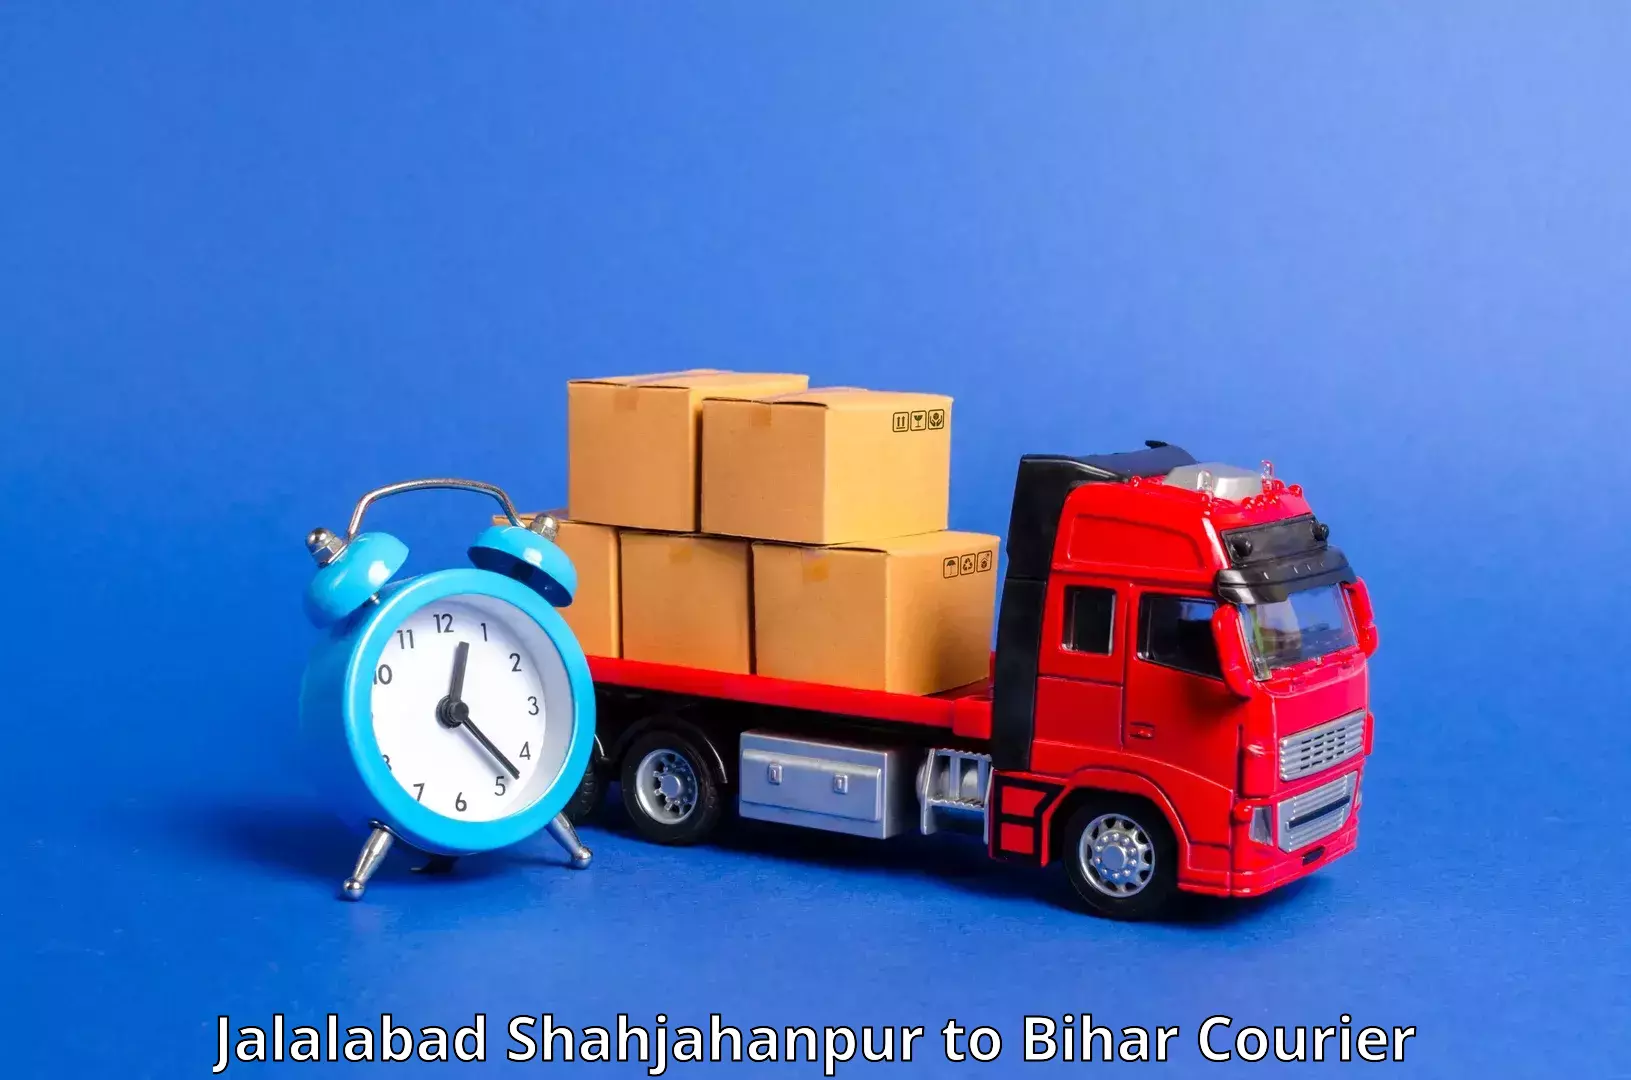 Express delivery solutions in Jalalabad Shahjahanpur to Sonbarsa